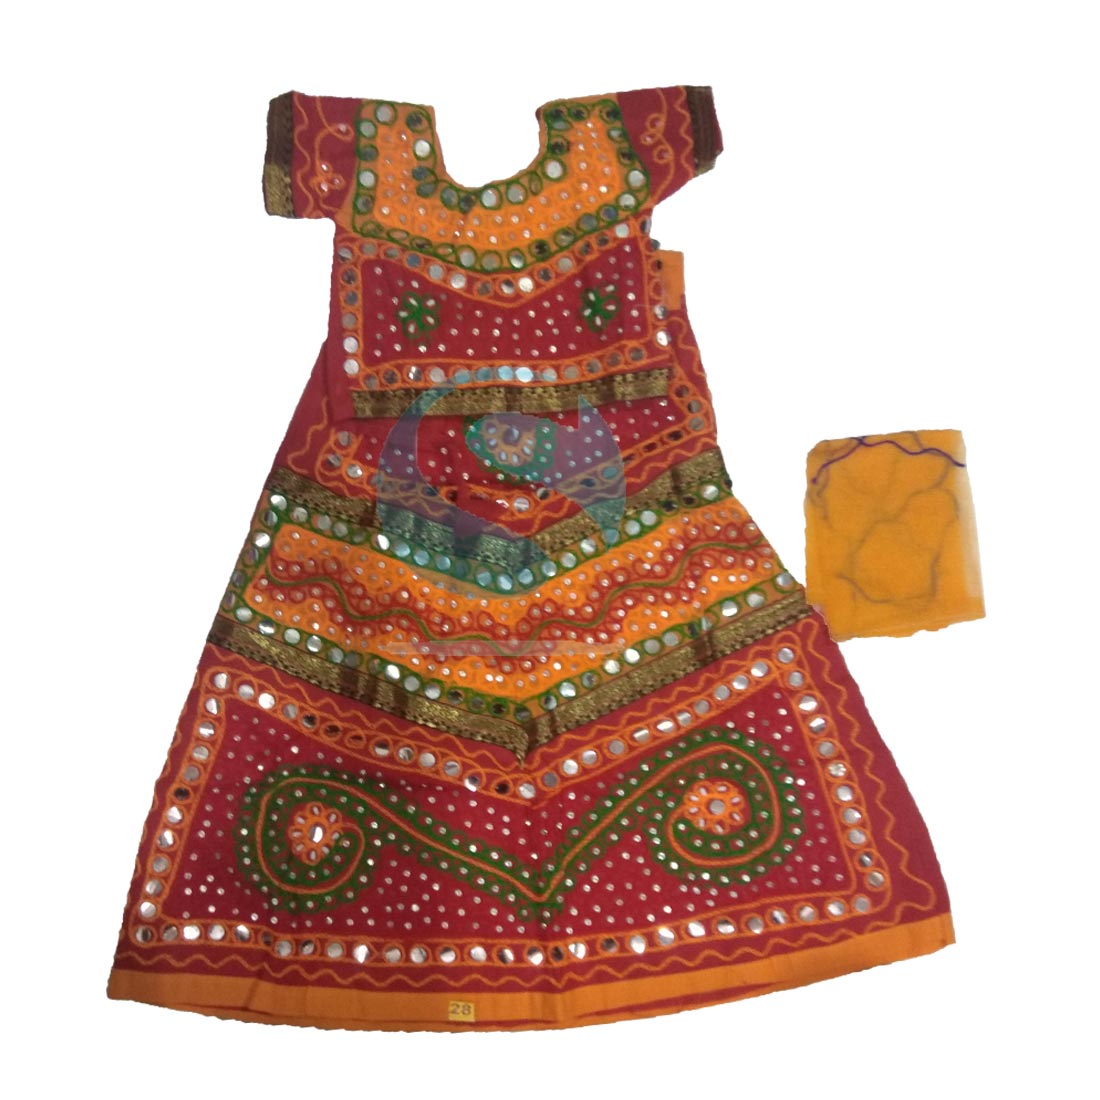 Get Gujarati Dress on Rent For Girls & Boys In India including 